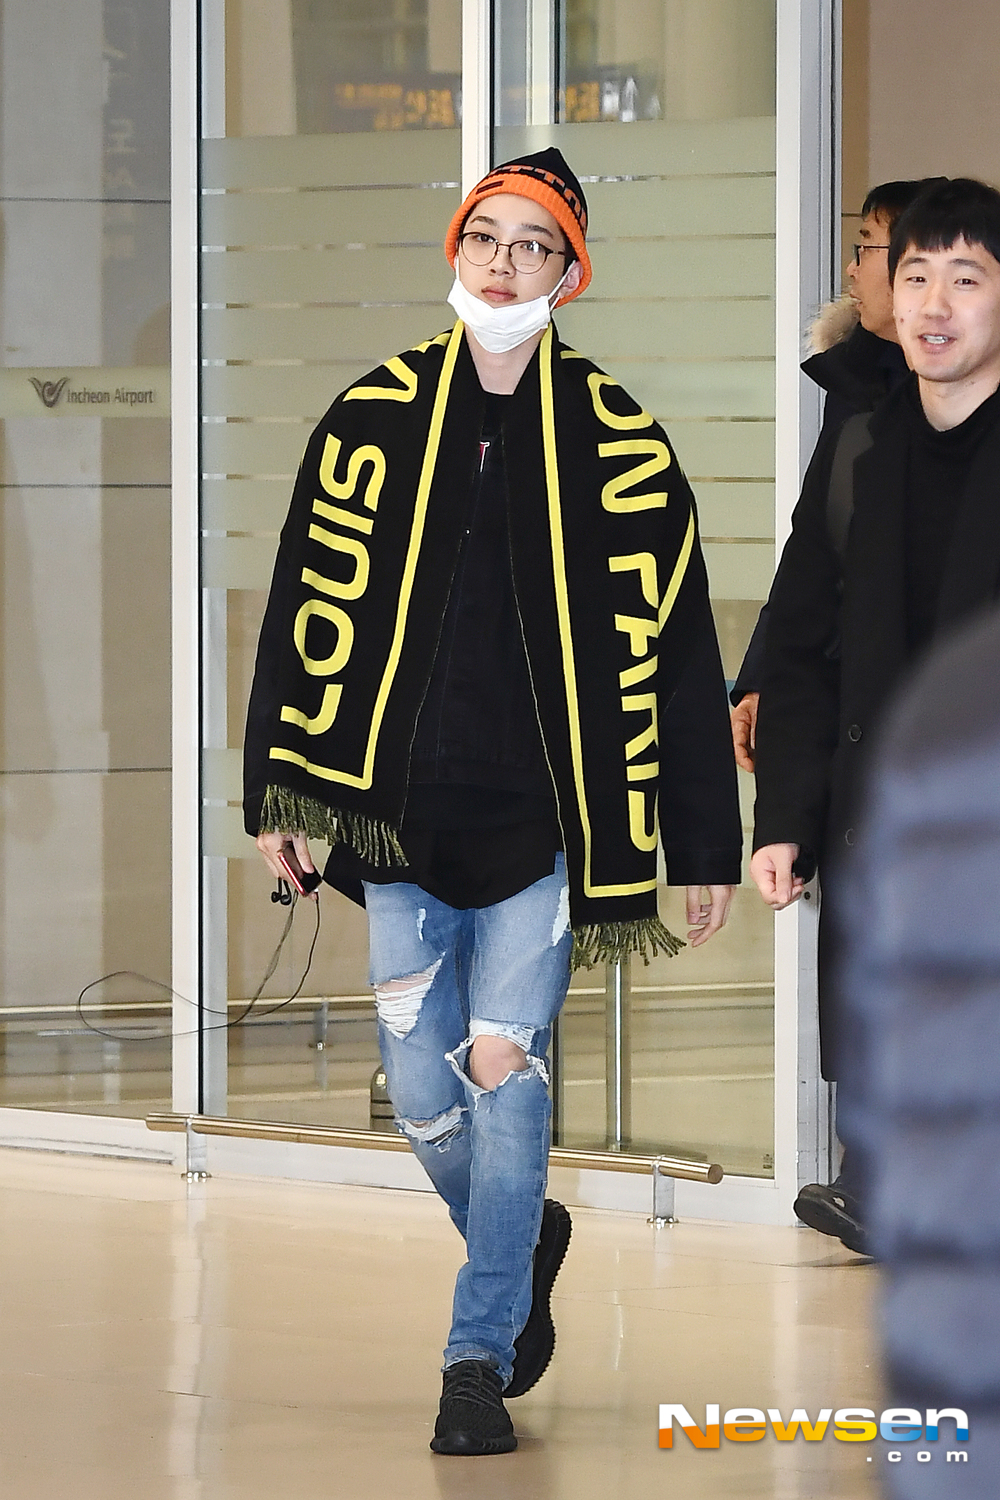 Former Wanna One member Lai Kuan-lin (LAIKUANLIN) arrived at the Incheon International Airport in Unseo-dong, Jung-gu, Incheon on the afternoon of February 20 after completing an overseas schedule.exponential earthquake